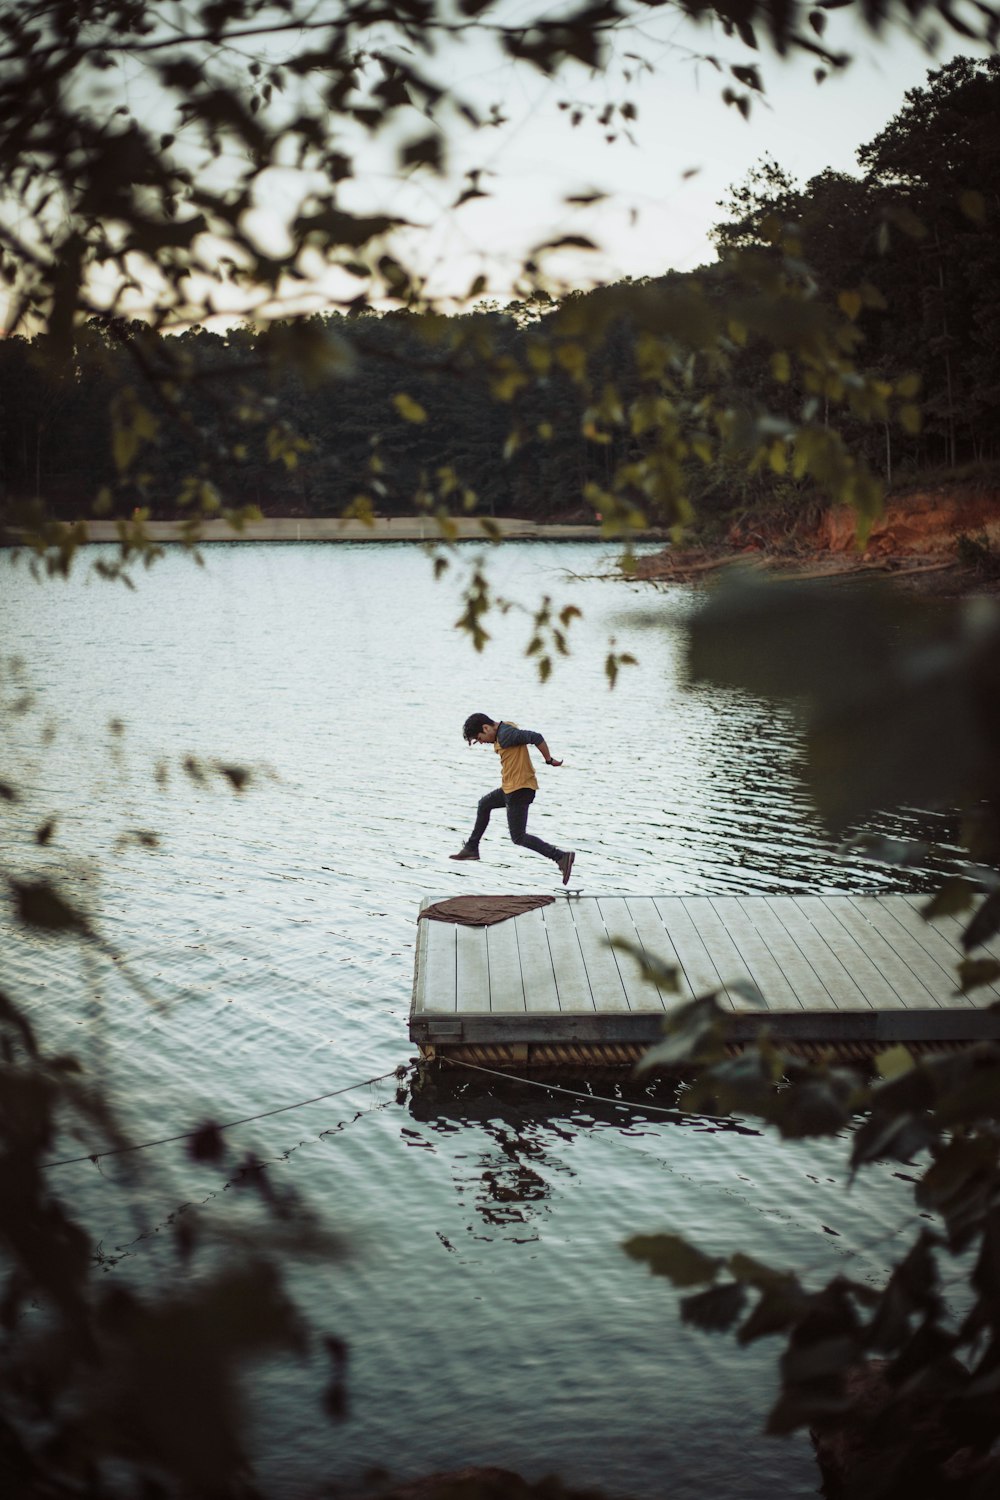 man jumping on wooden dock above body of water